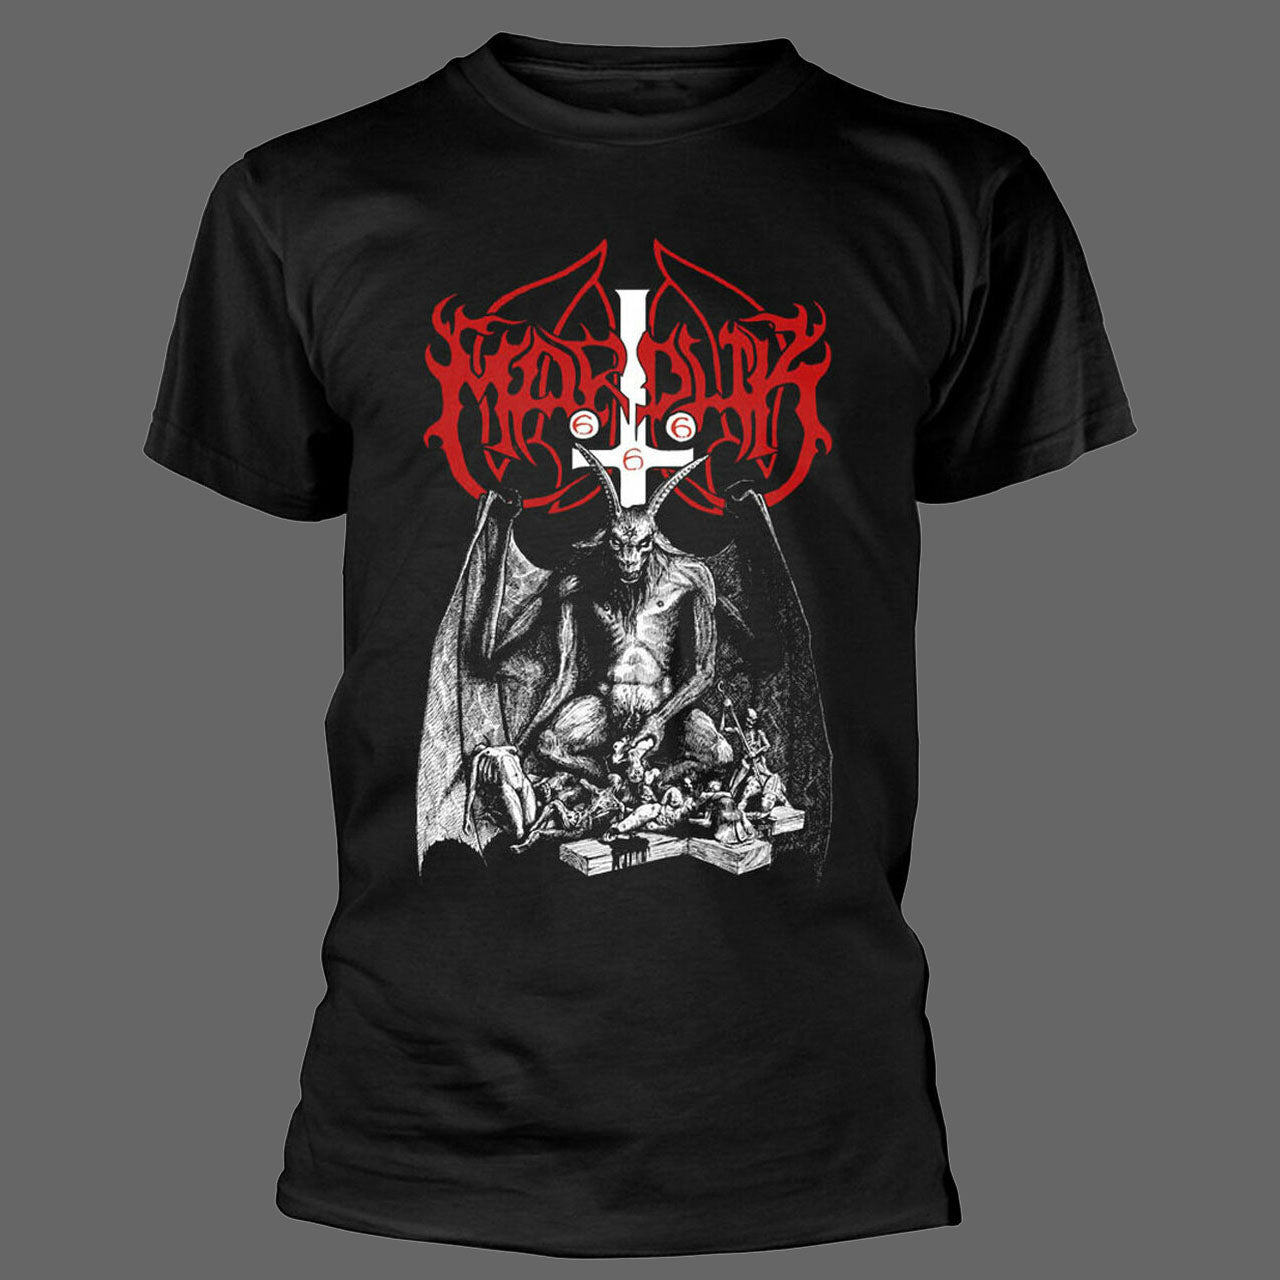 Marduk - Demon with Wings (T-Shirt)